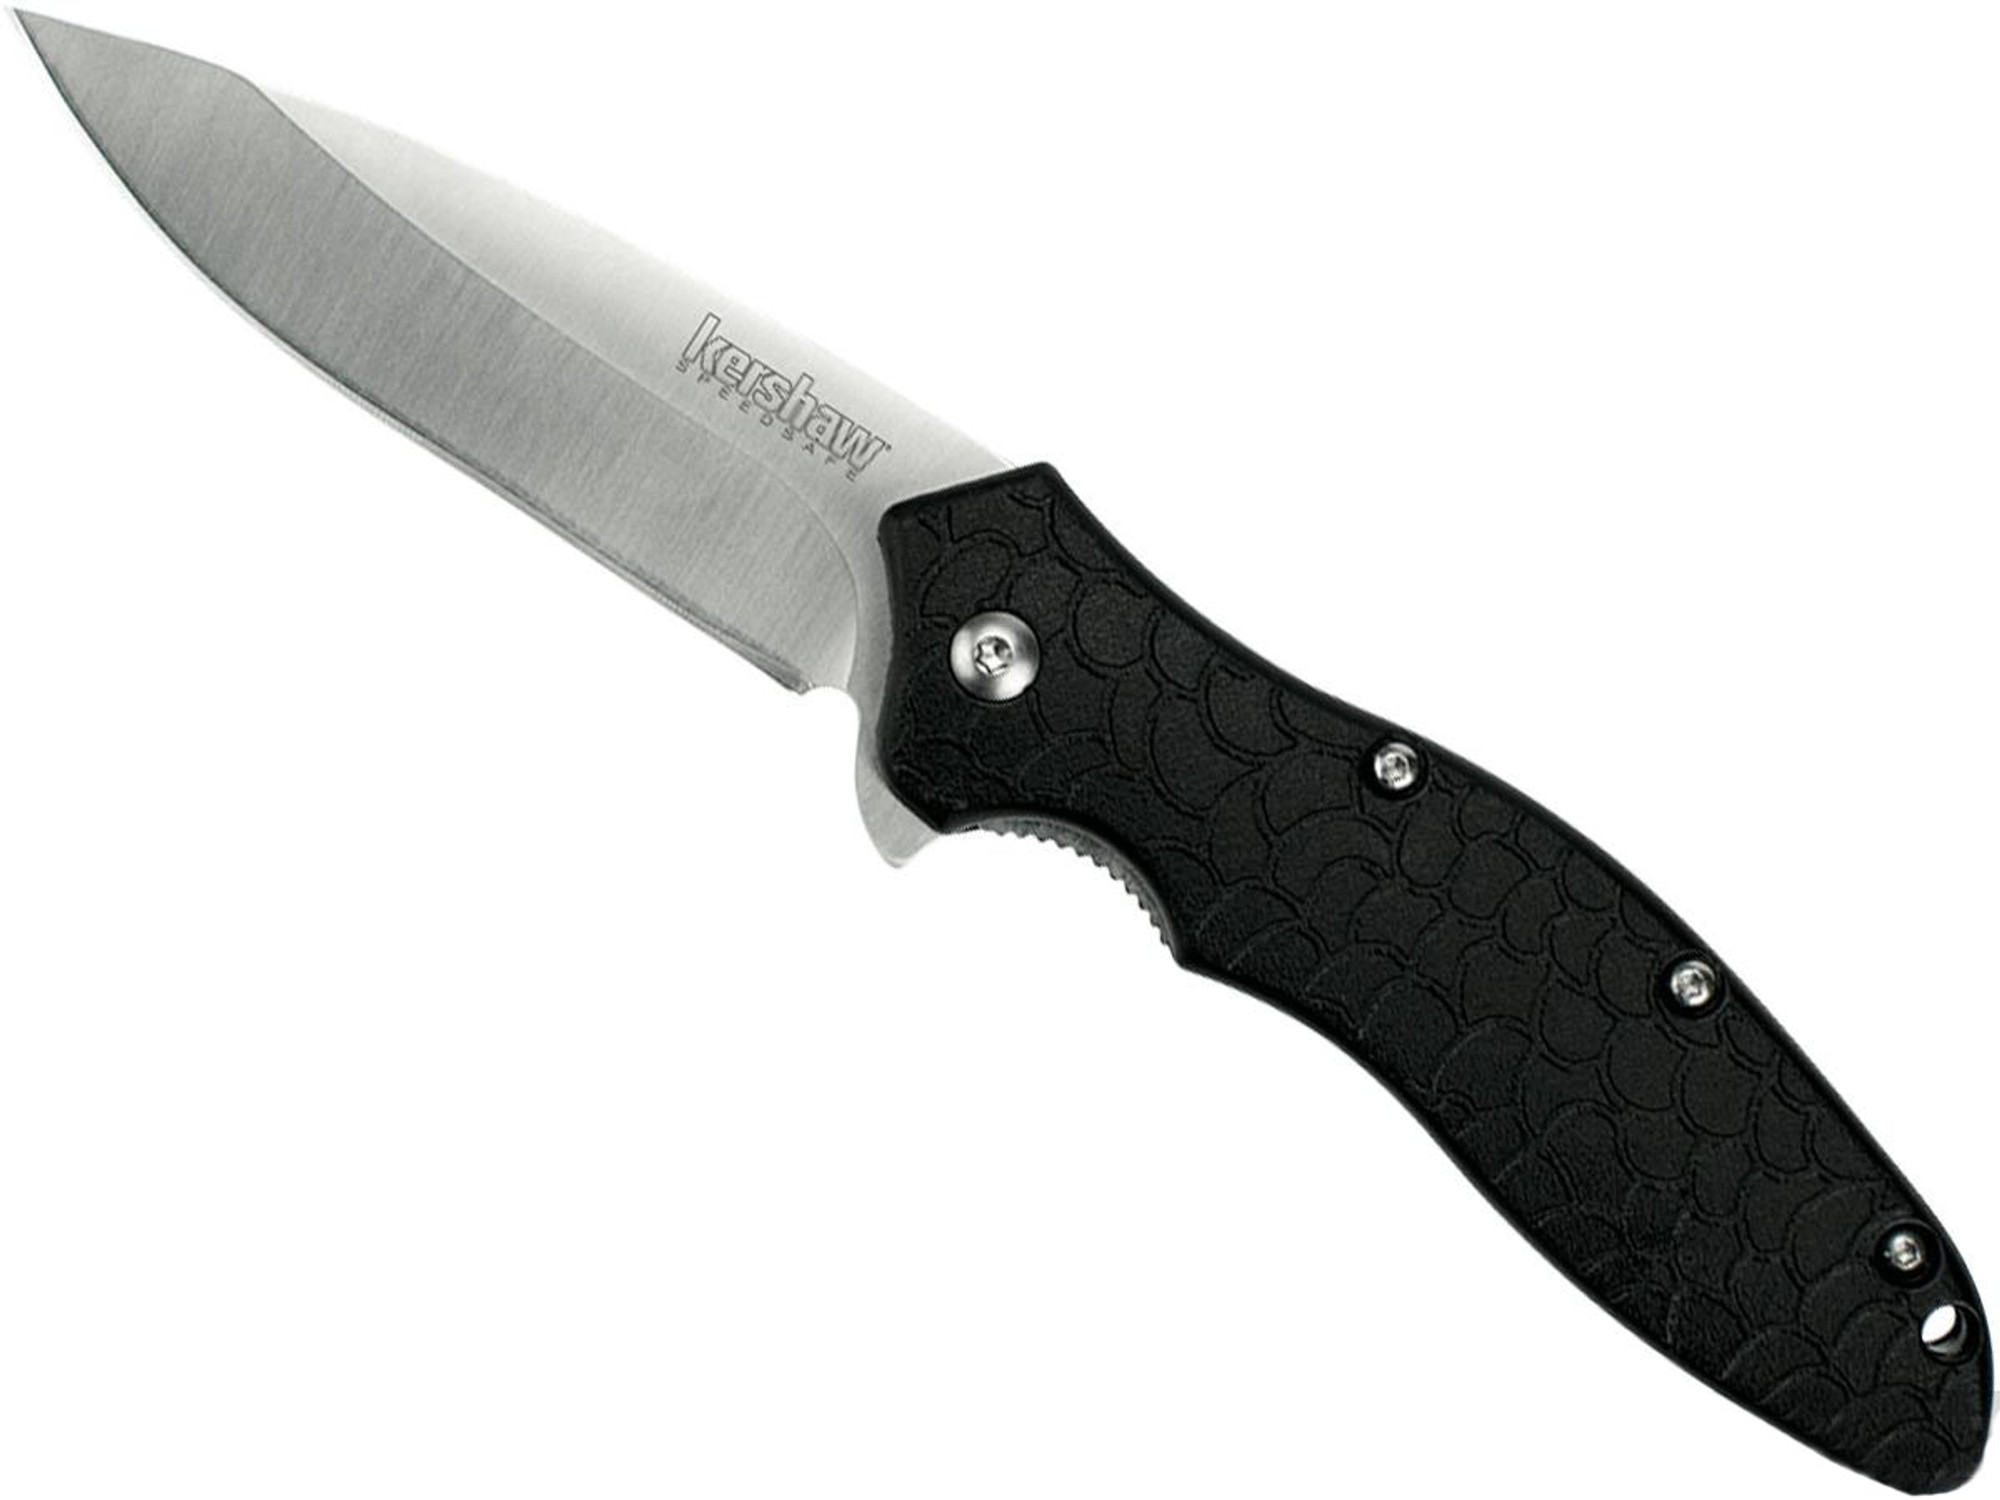 Kershaw Oso Sweet Folding Knife with 3.125" Blade and Speed Assist Opening